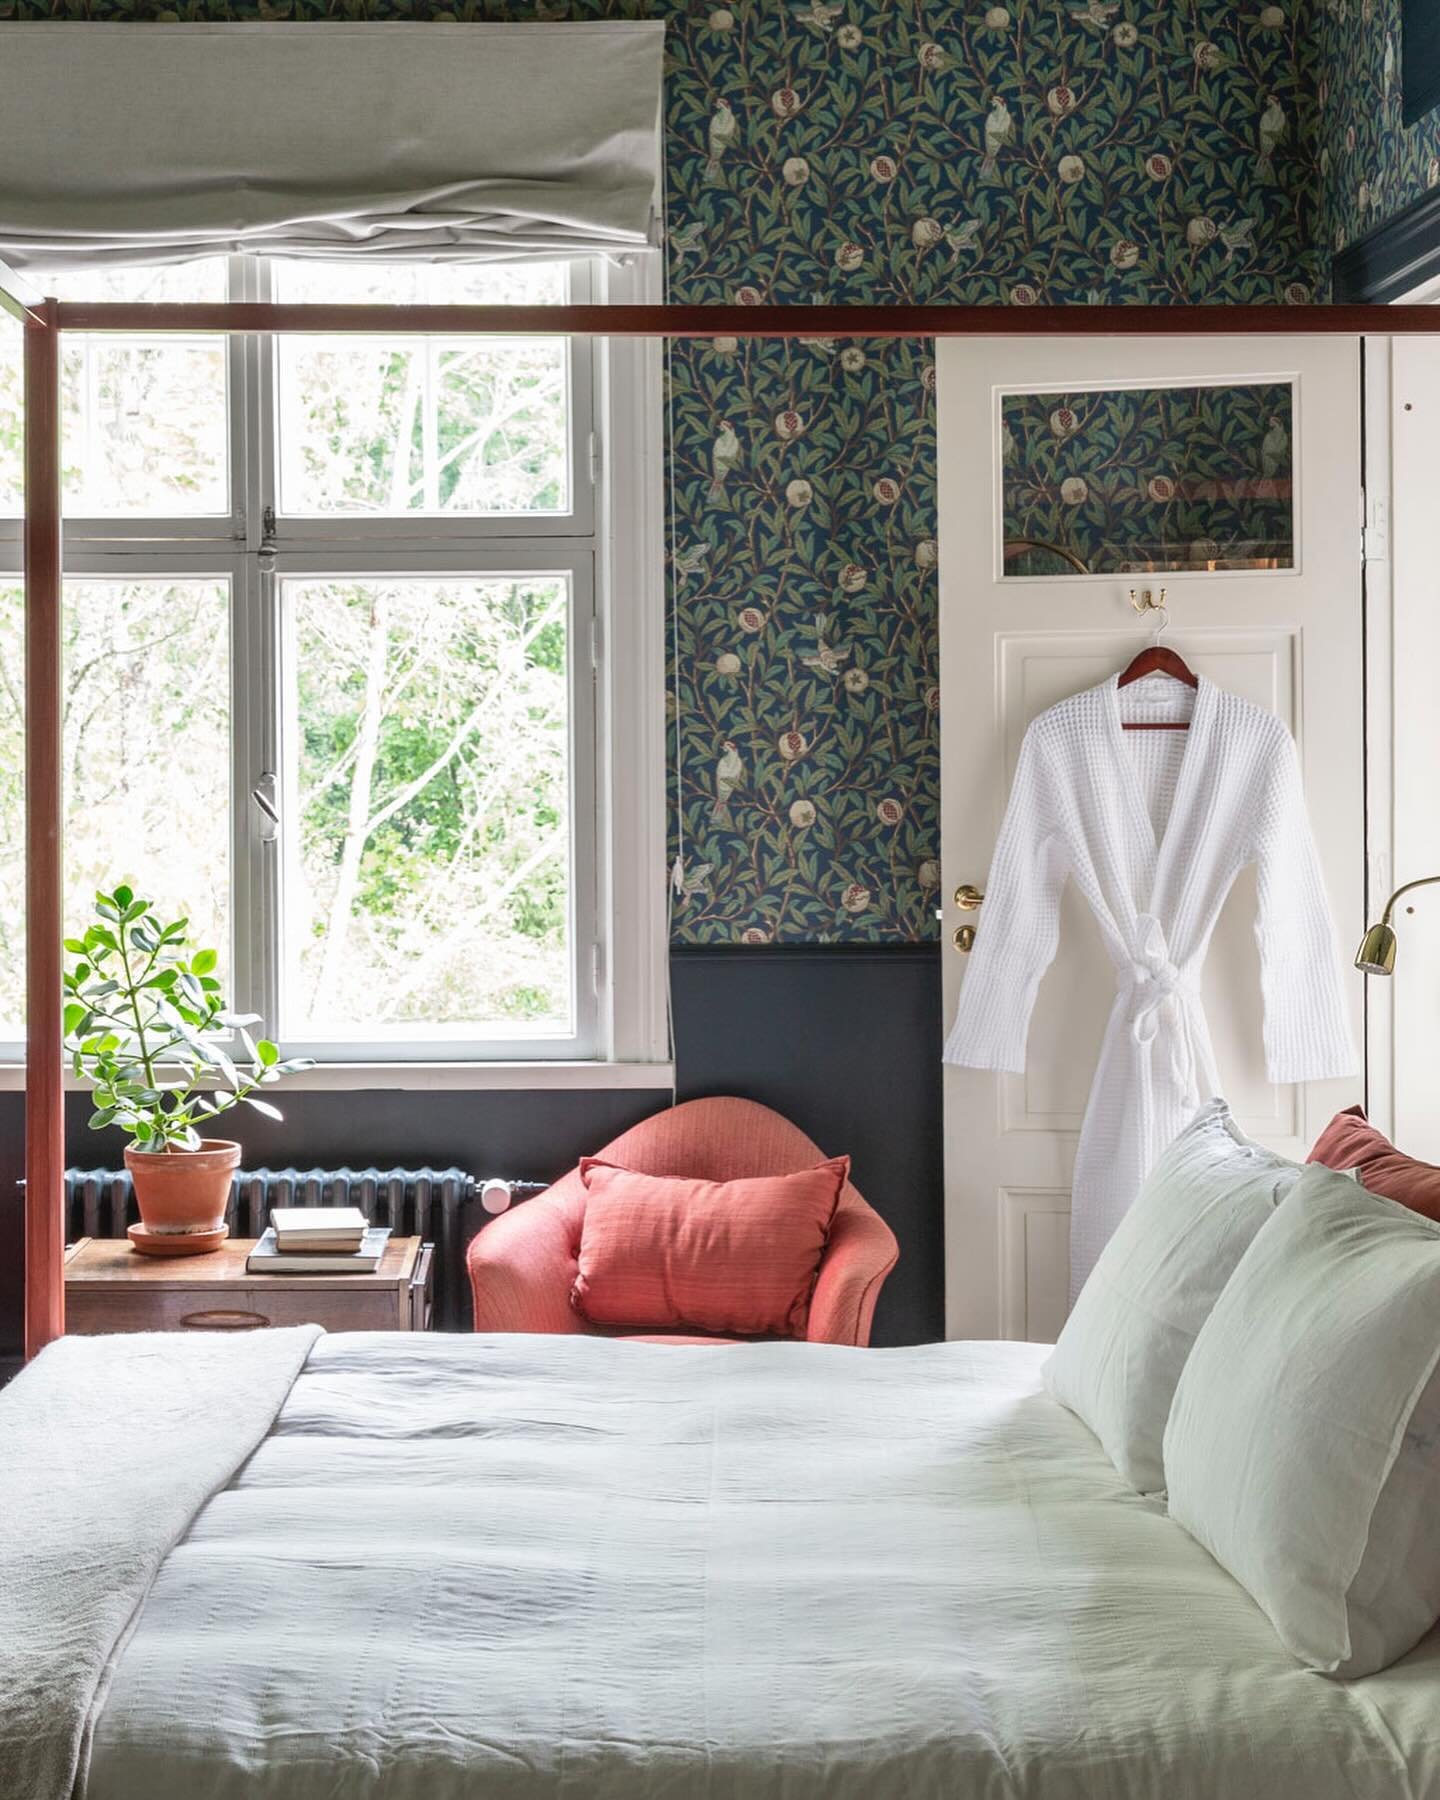 Did you spot Billn&auml;s G&aring;rd in @cntraveler? 👀

An hour outside Helsinki, this boutique hotel and wellness centre offers unique after-dark wellness experiences tailored for couples. 👩&zwj;❤️&zwj;💋&zwj;👨

Their &lsquo;Connection&rsquo; exp